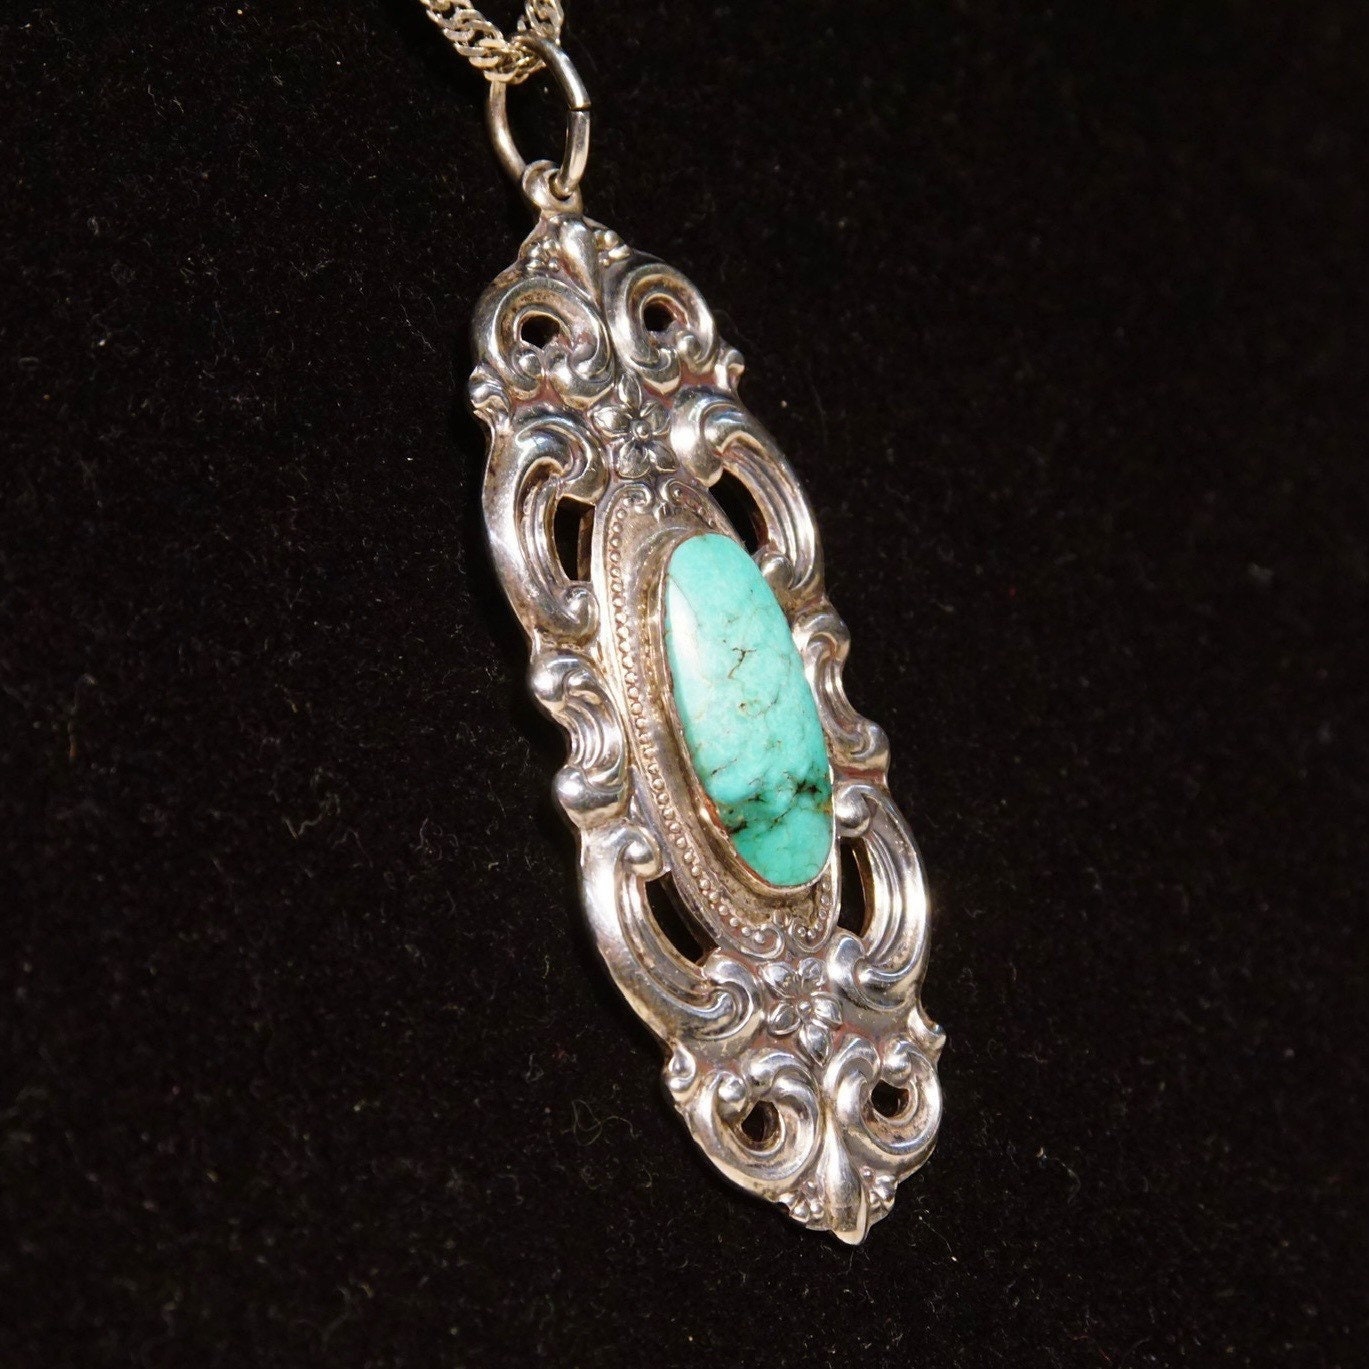 Vintage Towle sterling silver pendant featuring an ornate embossed repousse design with floral motifs in an Art Nouveau style, set with a turquoise cabochon. The pendant measures 2 3/4 inches in length.